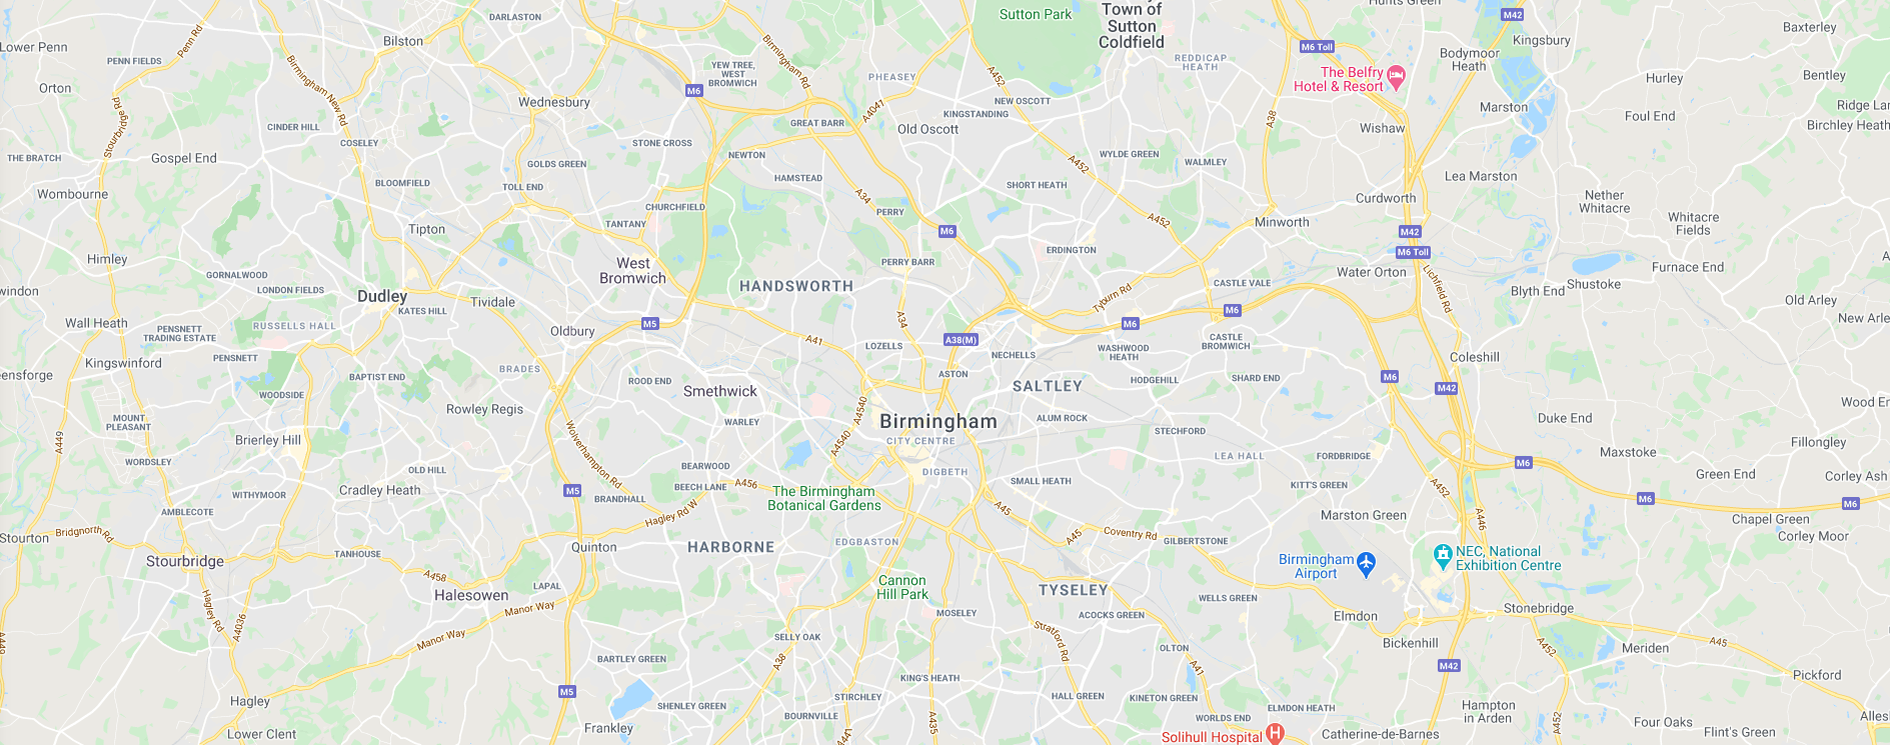 Get Fishing | Map West Midlands England